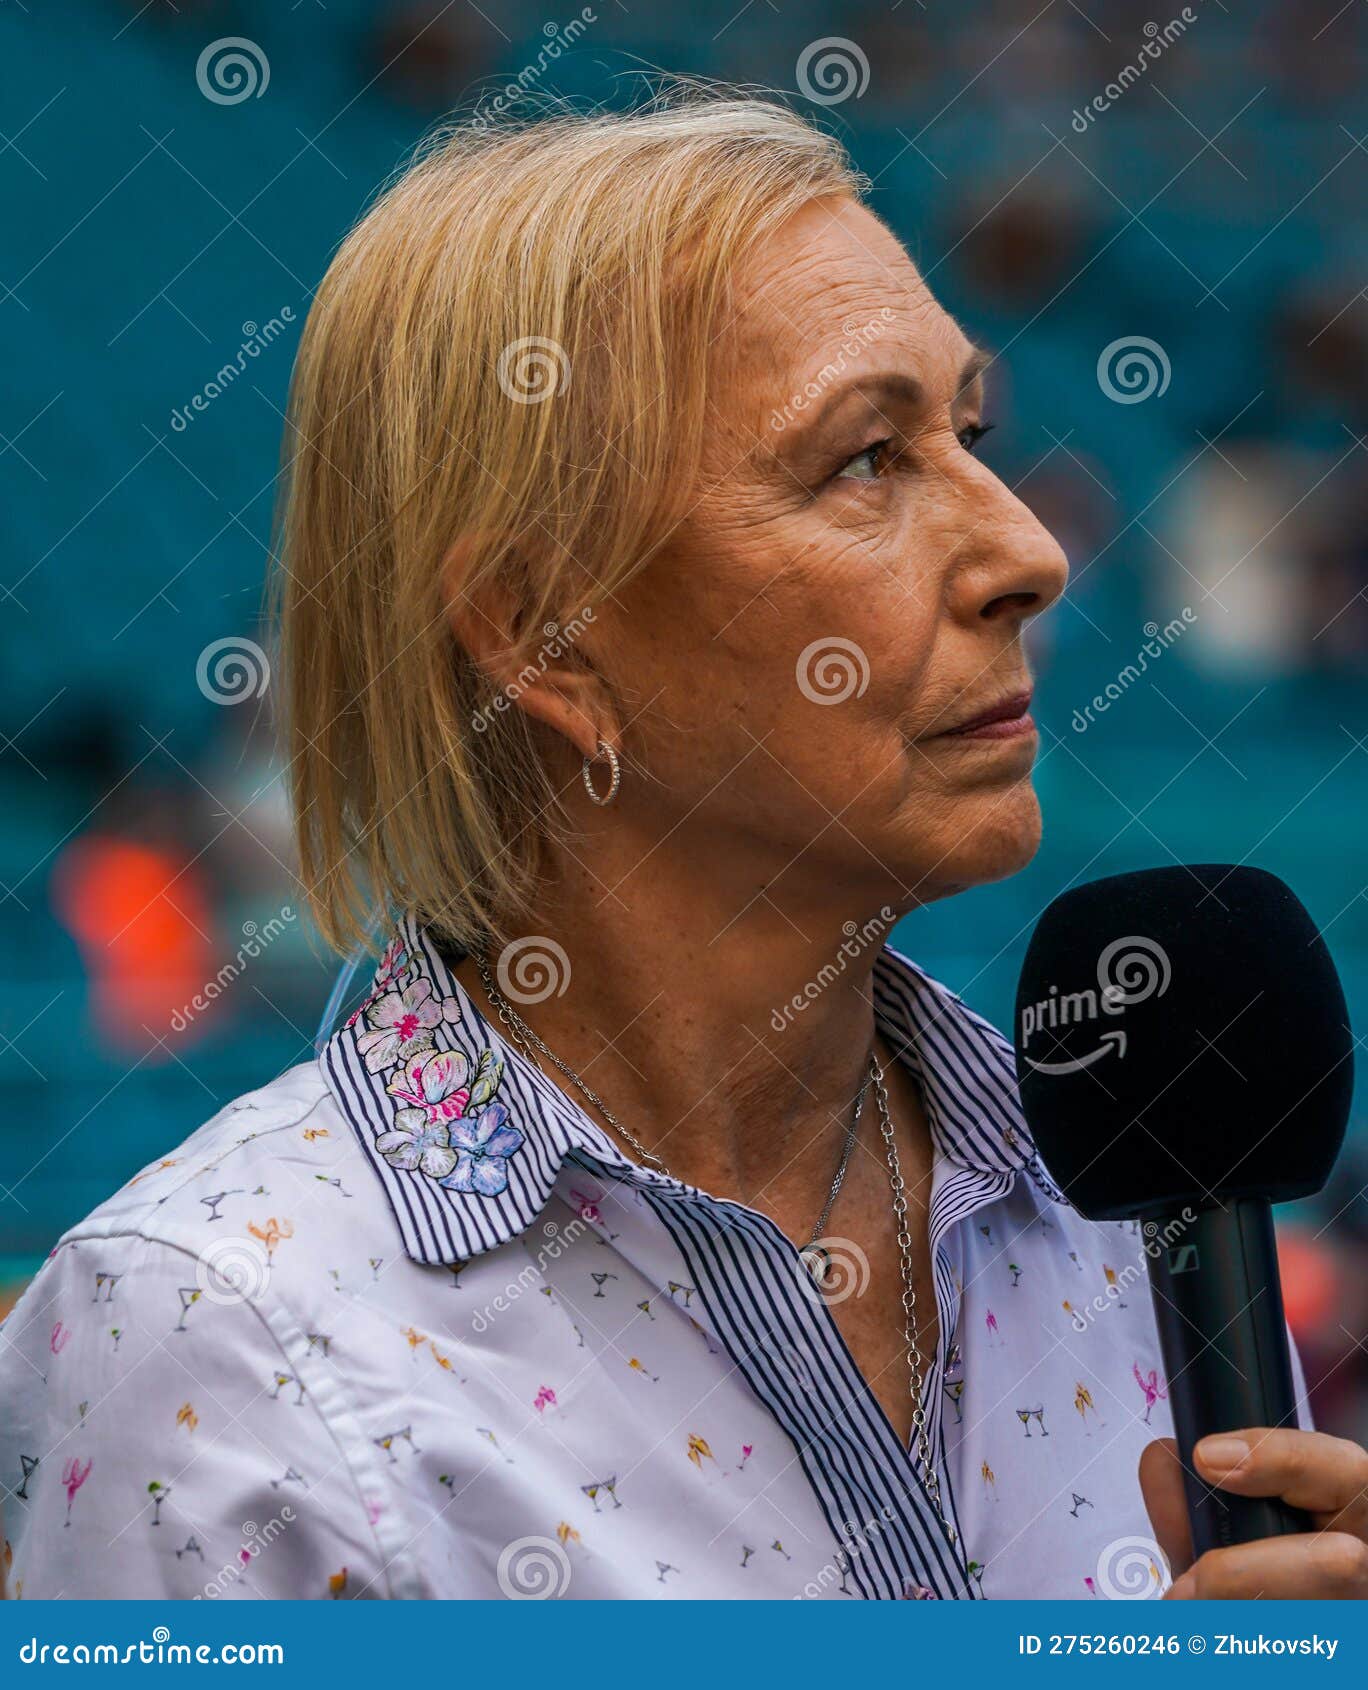 MIAMI GARDENS, FLORIDA - APRIL 2, 2023: Czech-American former professional tennis player and TV analyst Martina Navratilova during on court interview with Daniil Medvedev after men s singles final match at 2023 Miami Open